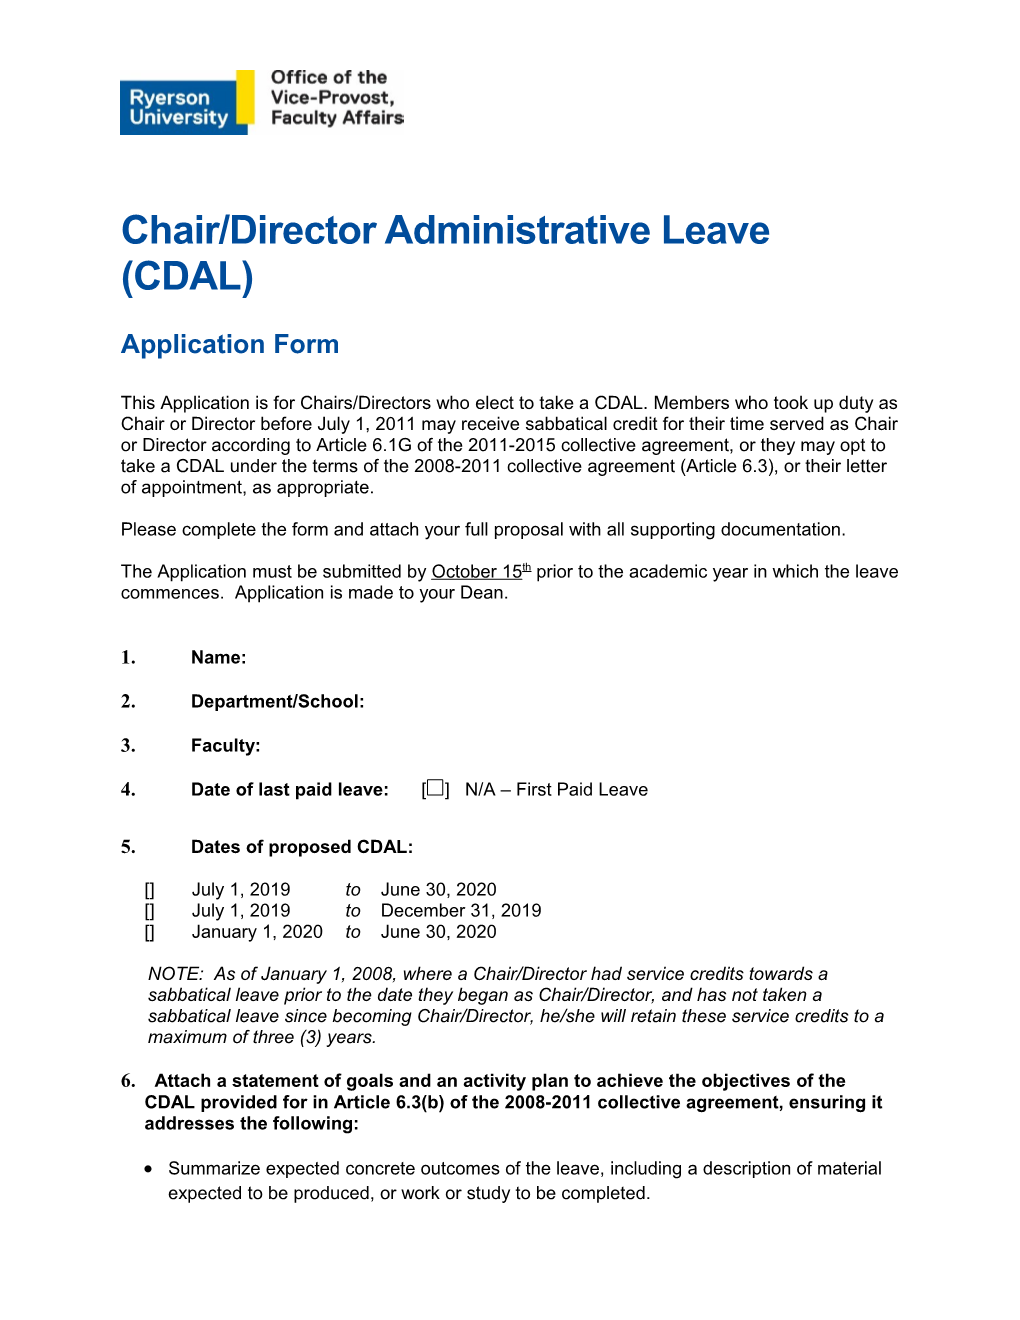 Chair/Director Administrative Leave (CDAL)